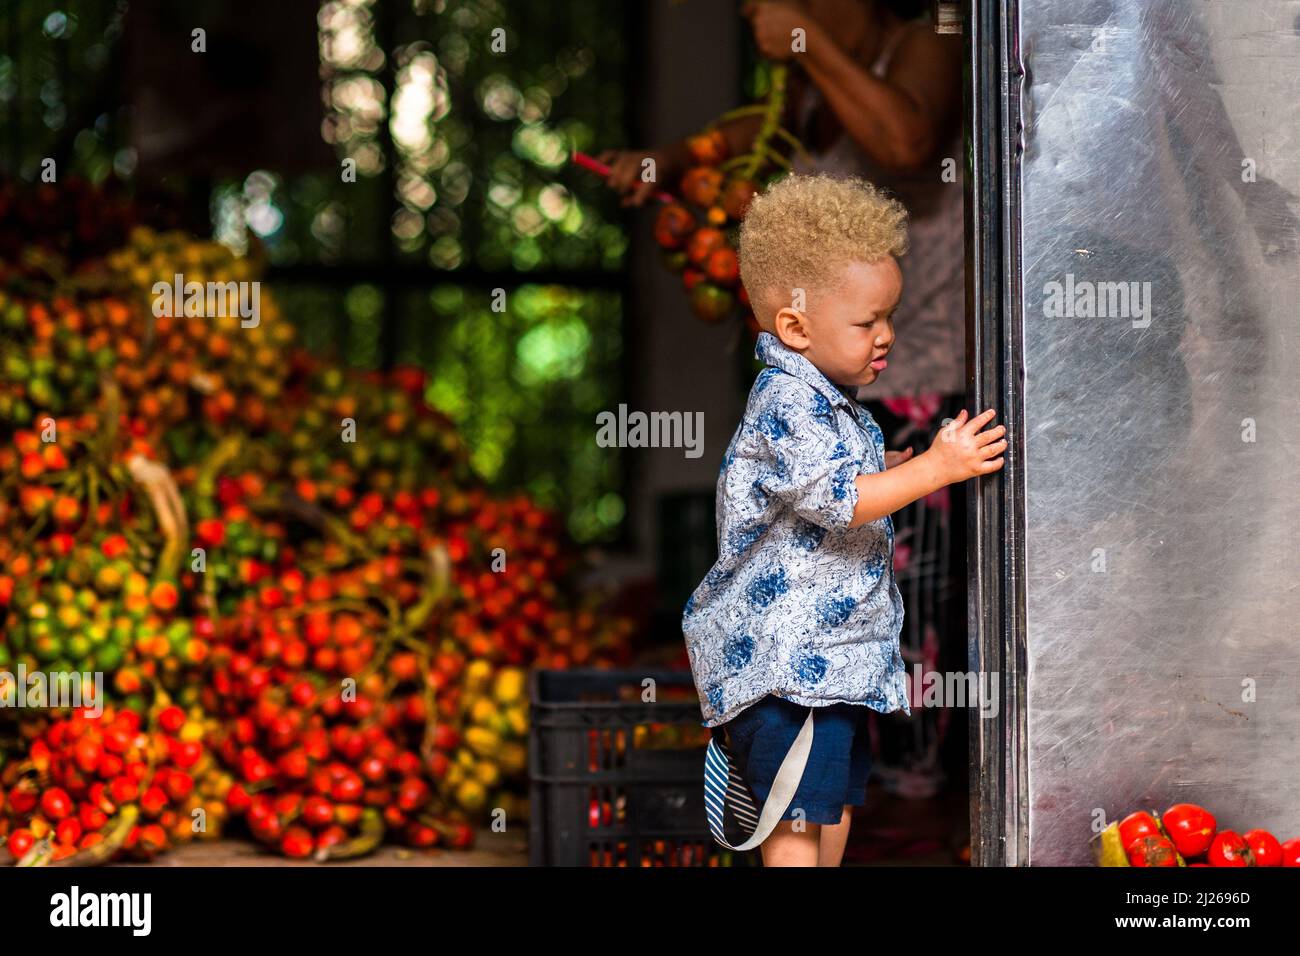 An Afro-Colombian albino boy hangs out during the chontaduro (peach palm) fruit processing in a facility in Cali, Valle del Cauca, Colombia. Stock Photo